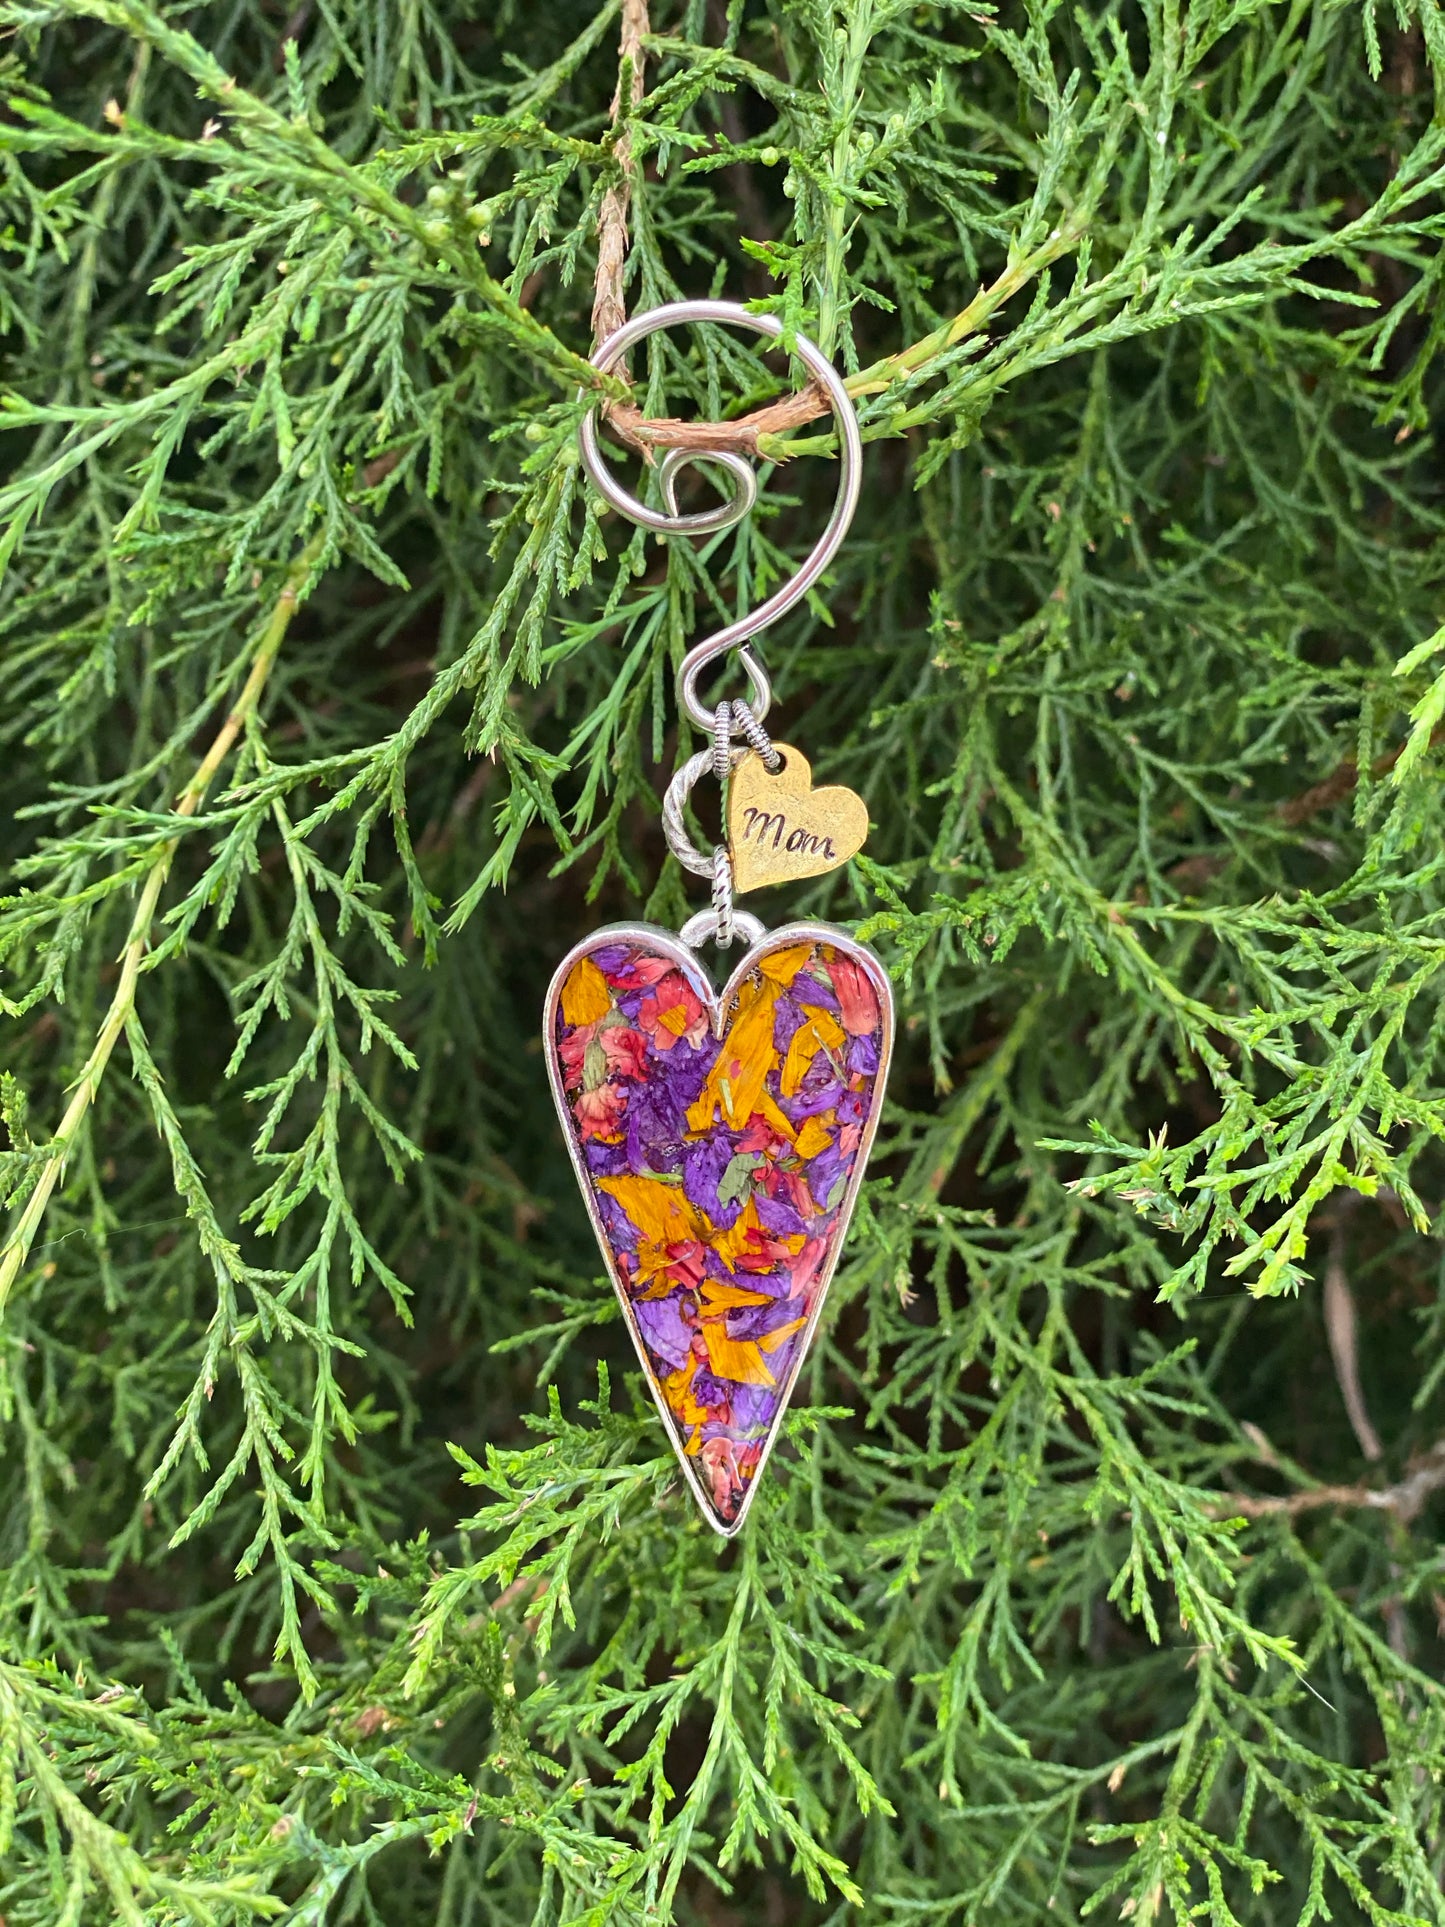 Memory Flower Heart Ornament with stamped Heart Charm